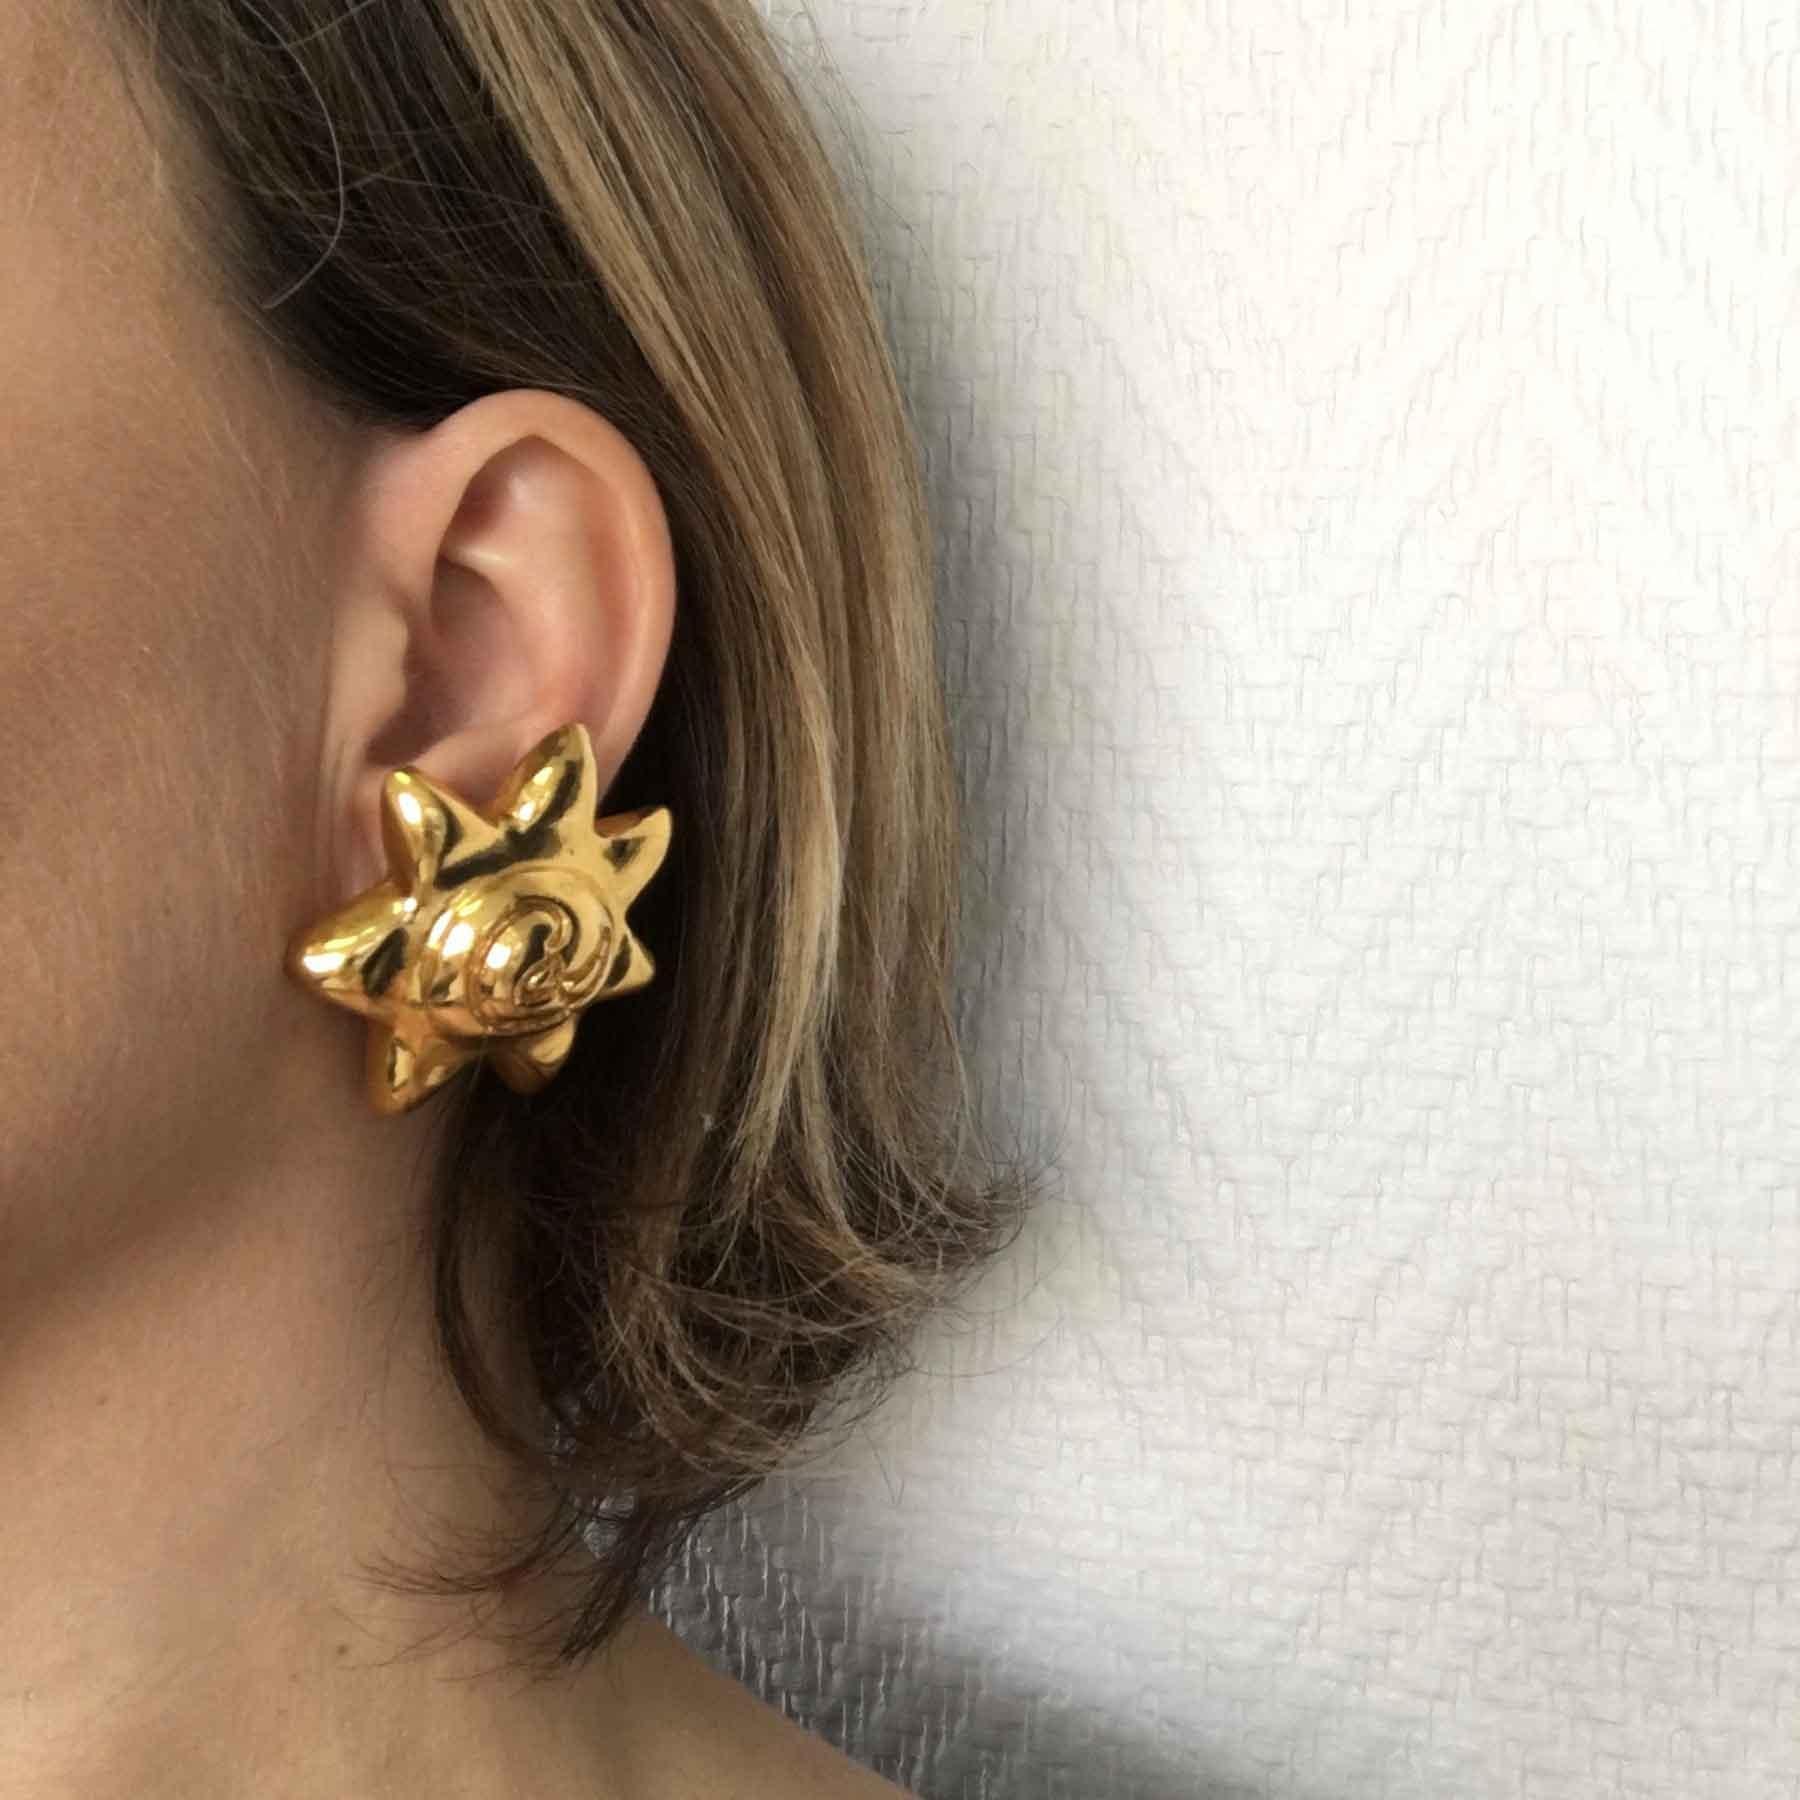 Christian Lacroix star clip earrings in gold metal. The initials CL are engraved in the center of each loop.
Vintage piece of jewelry in very good condition.
Dimensions: 4.5cm
Delivered in a non original dust bag